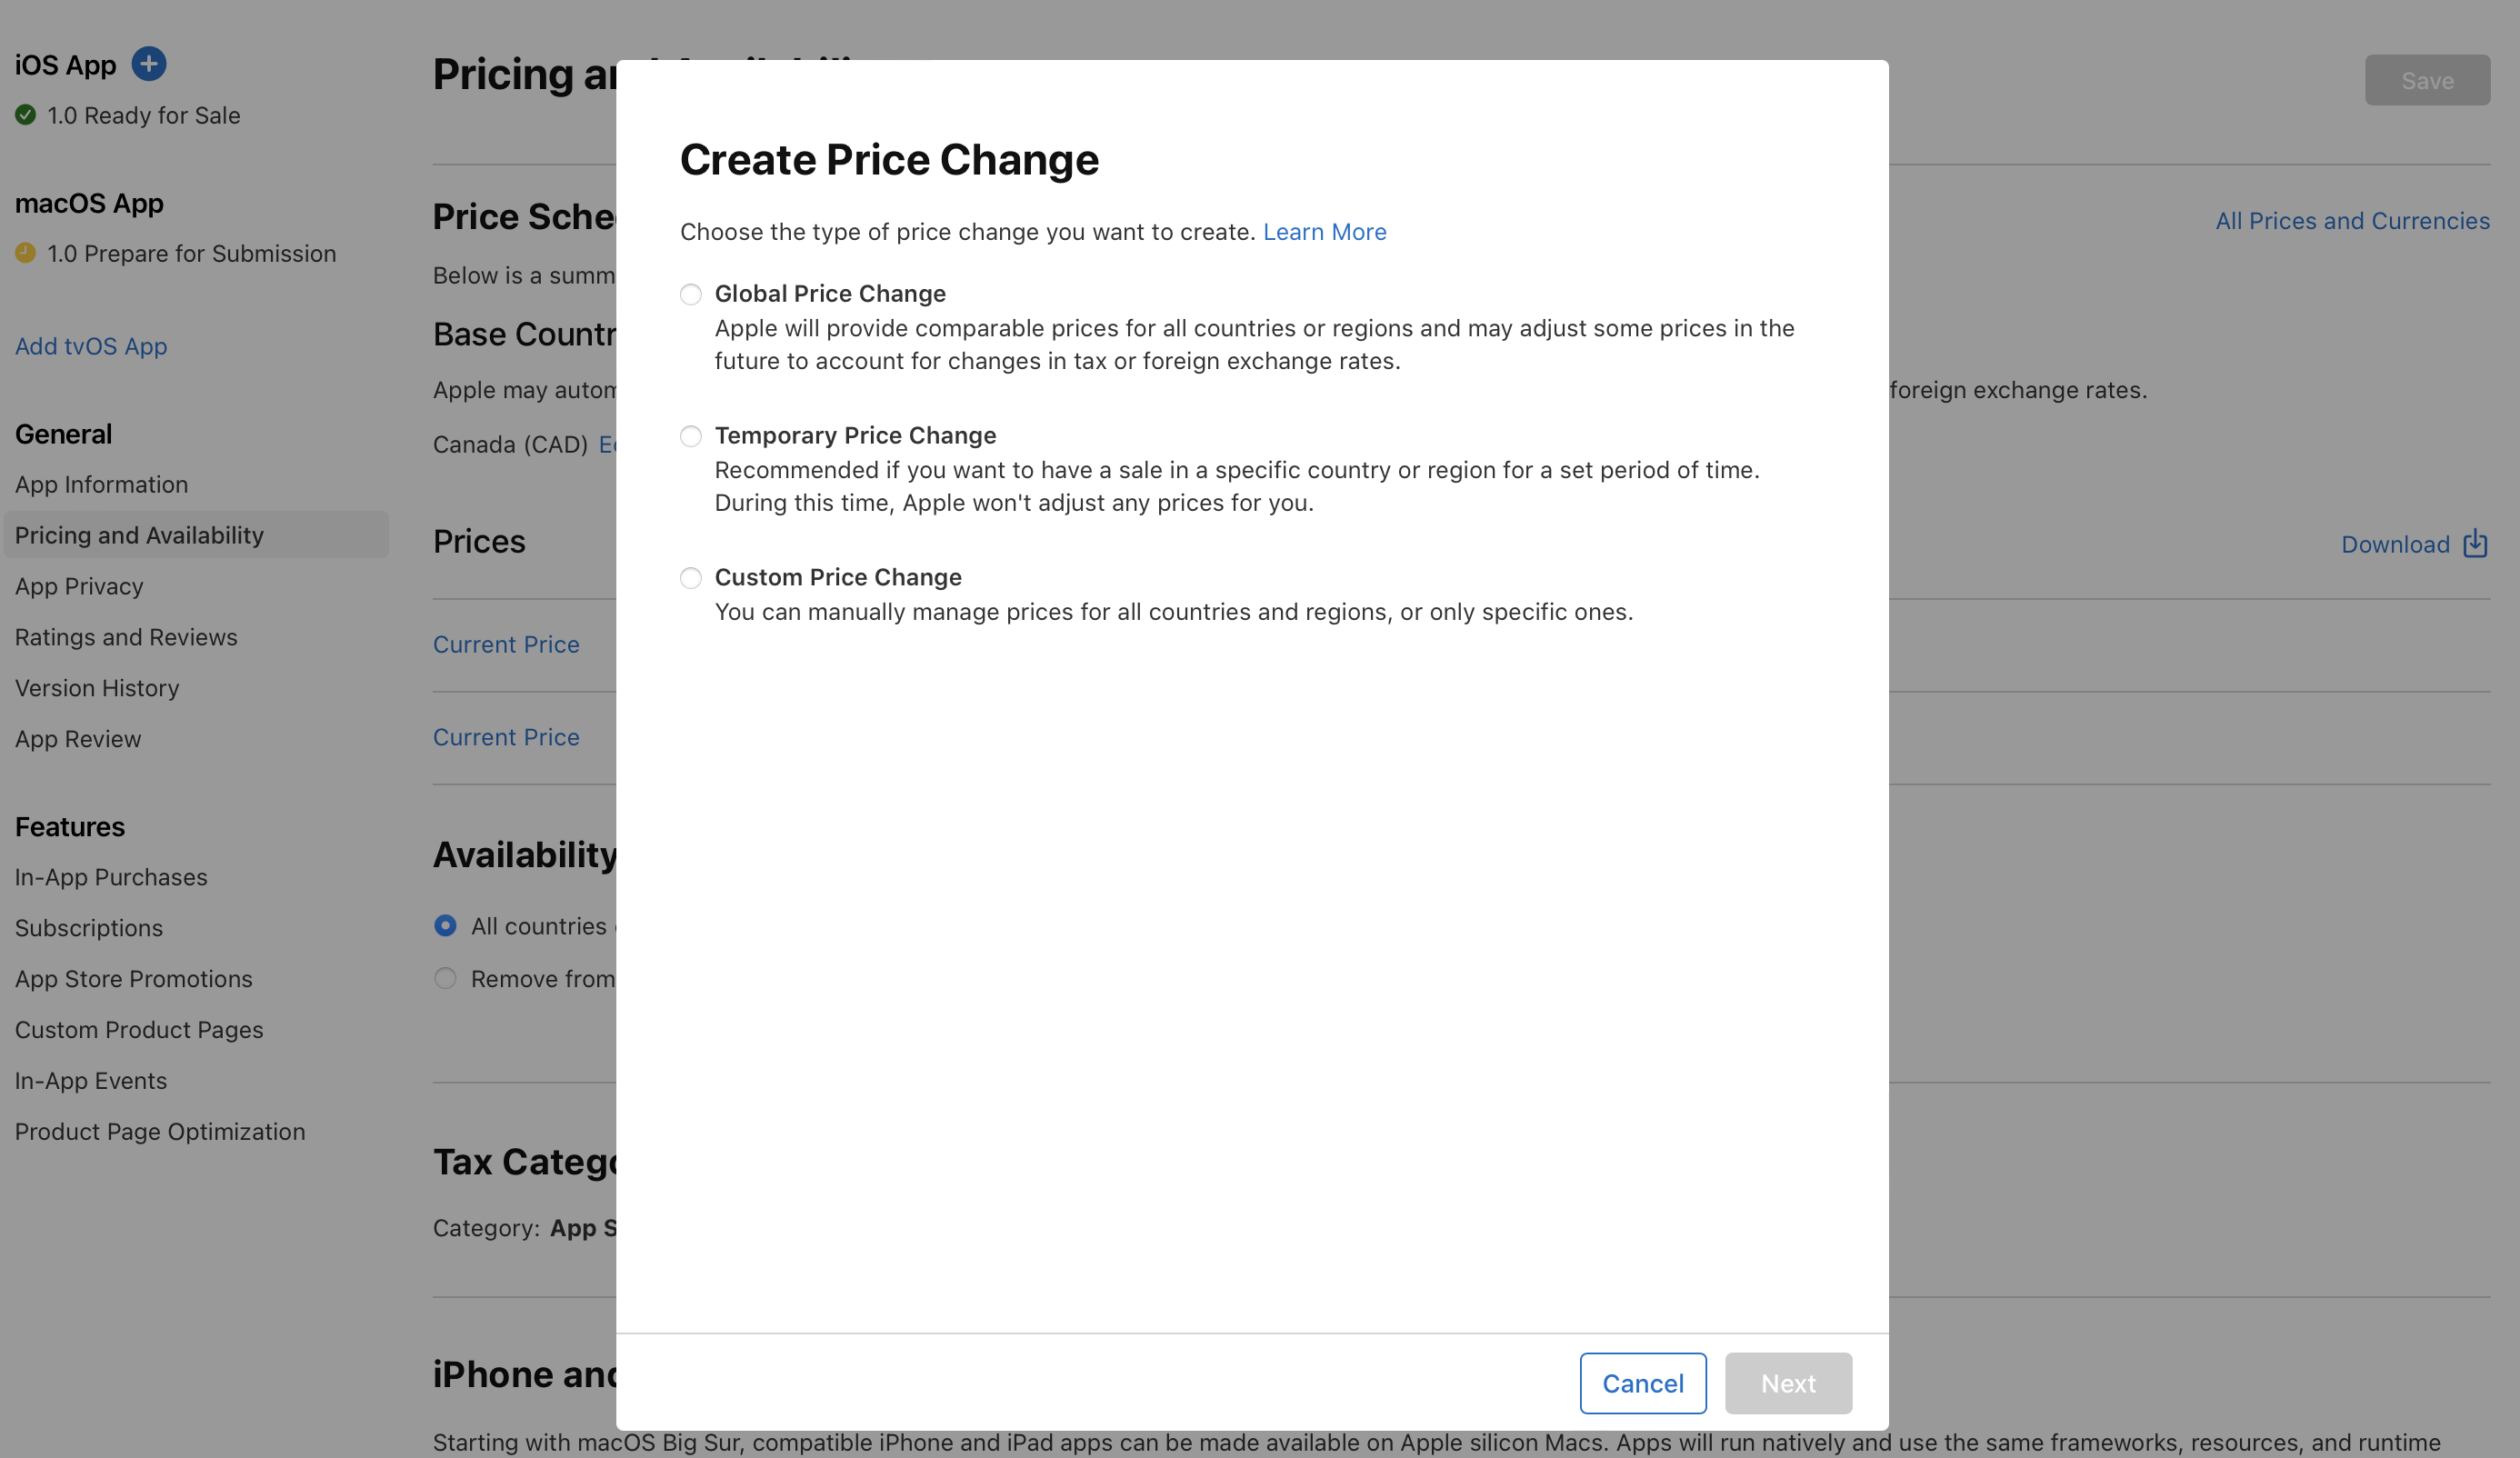 https://developer.apple.com/help/app-store-connect/manage-app-pricing/schedule-price-changes/images/schedule-price-change_2x.png